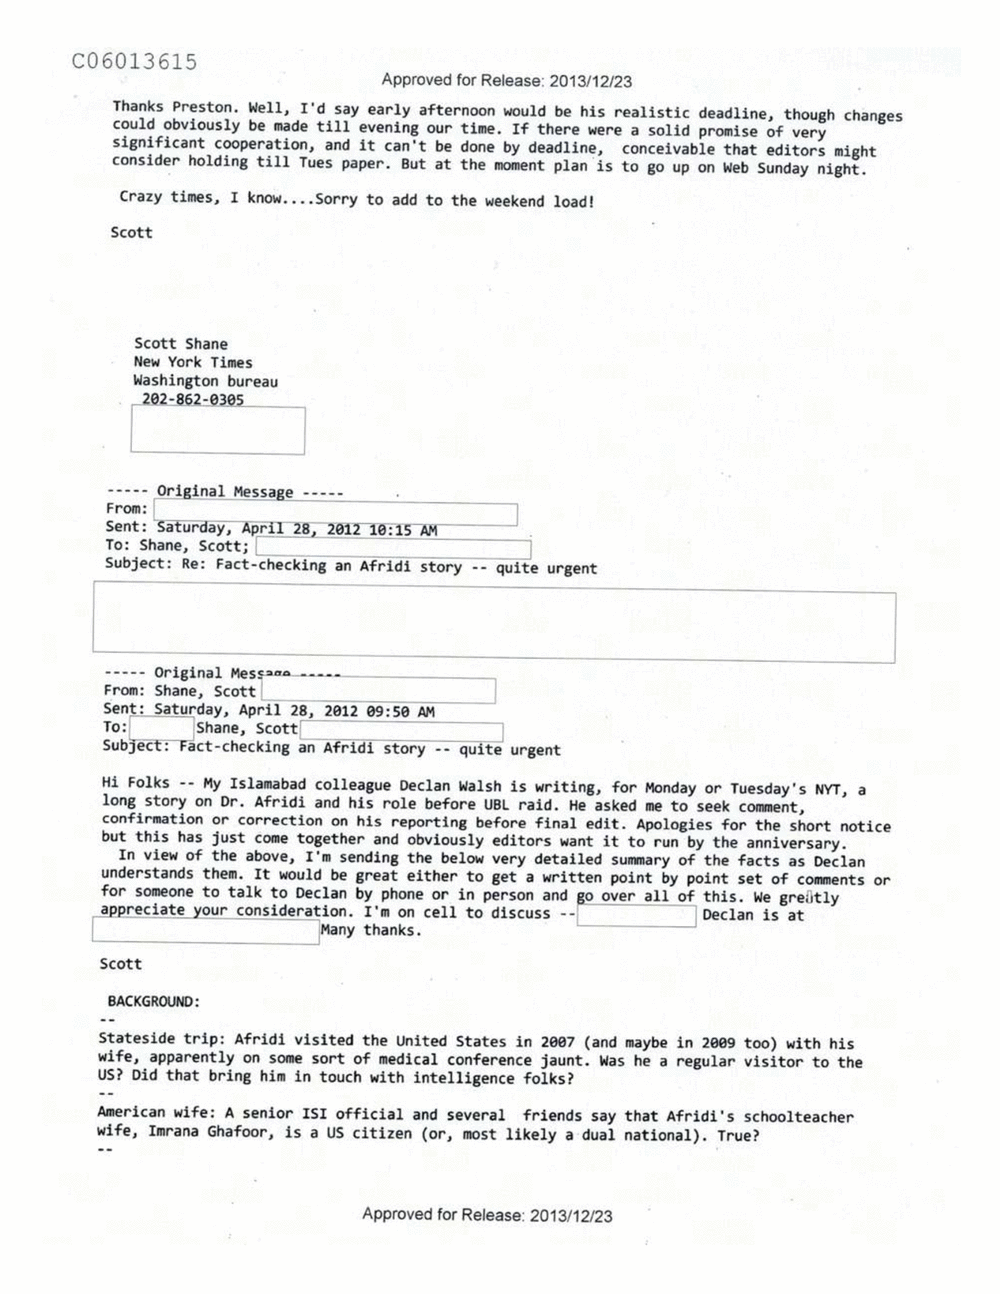 Page 438 from Email Correspondence Between Reporters and CIA Flacks